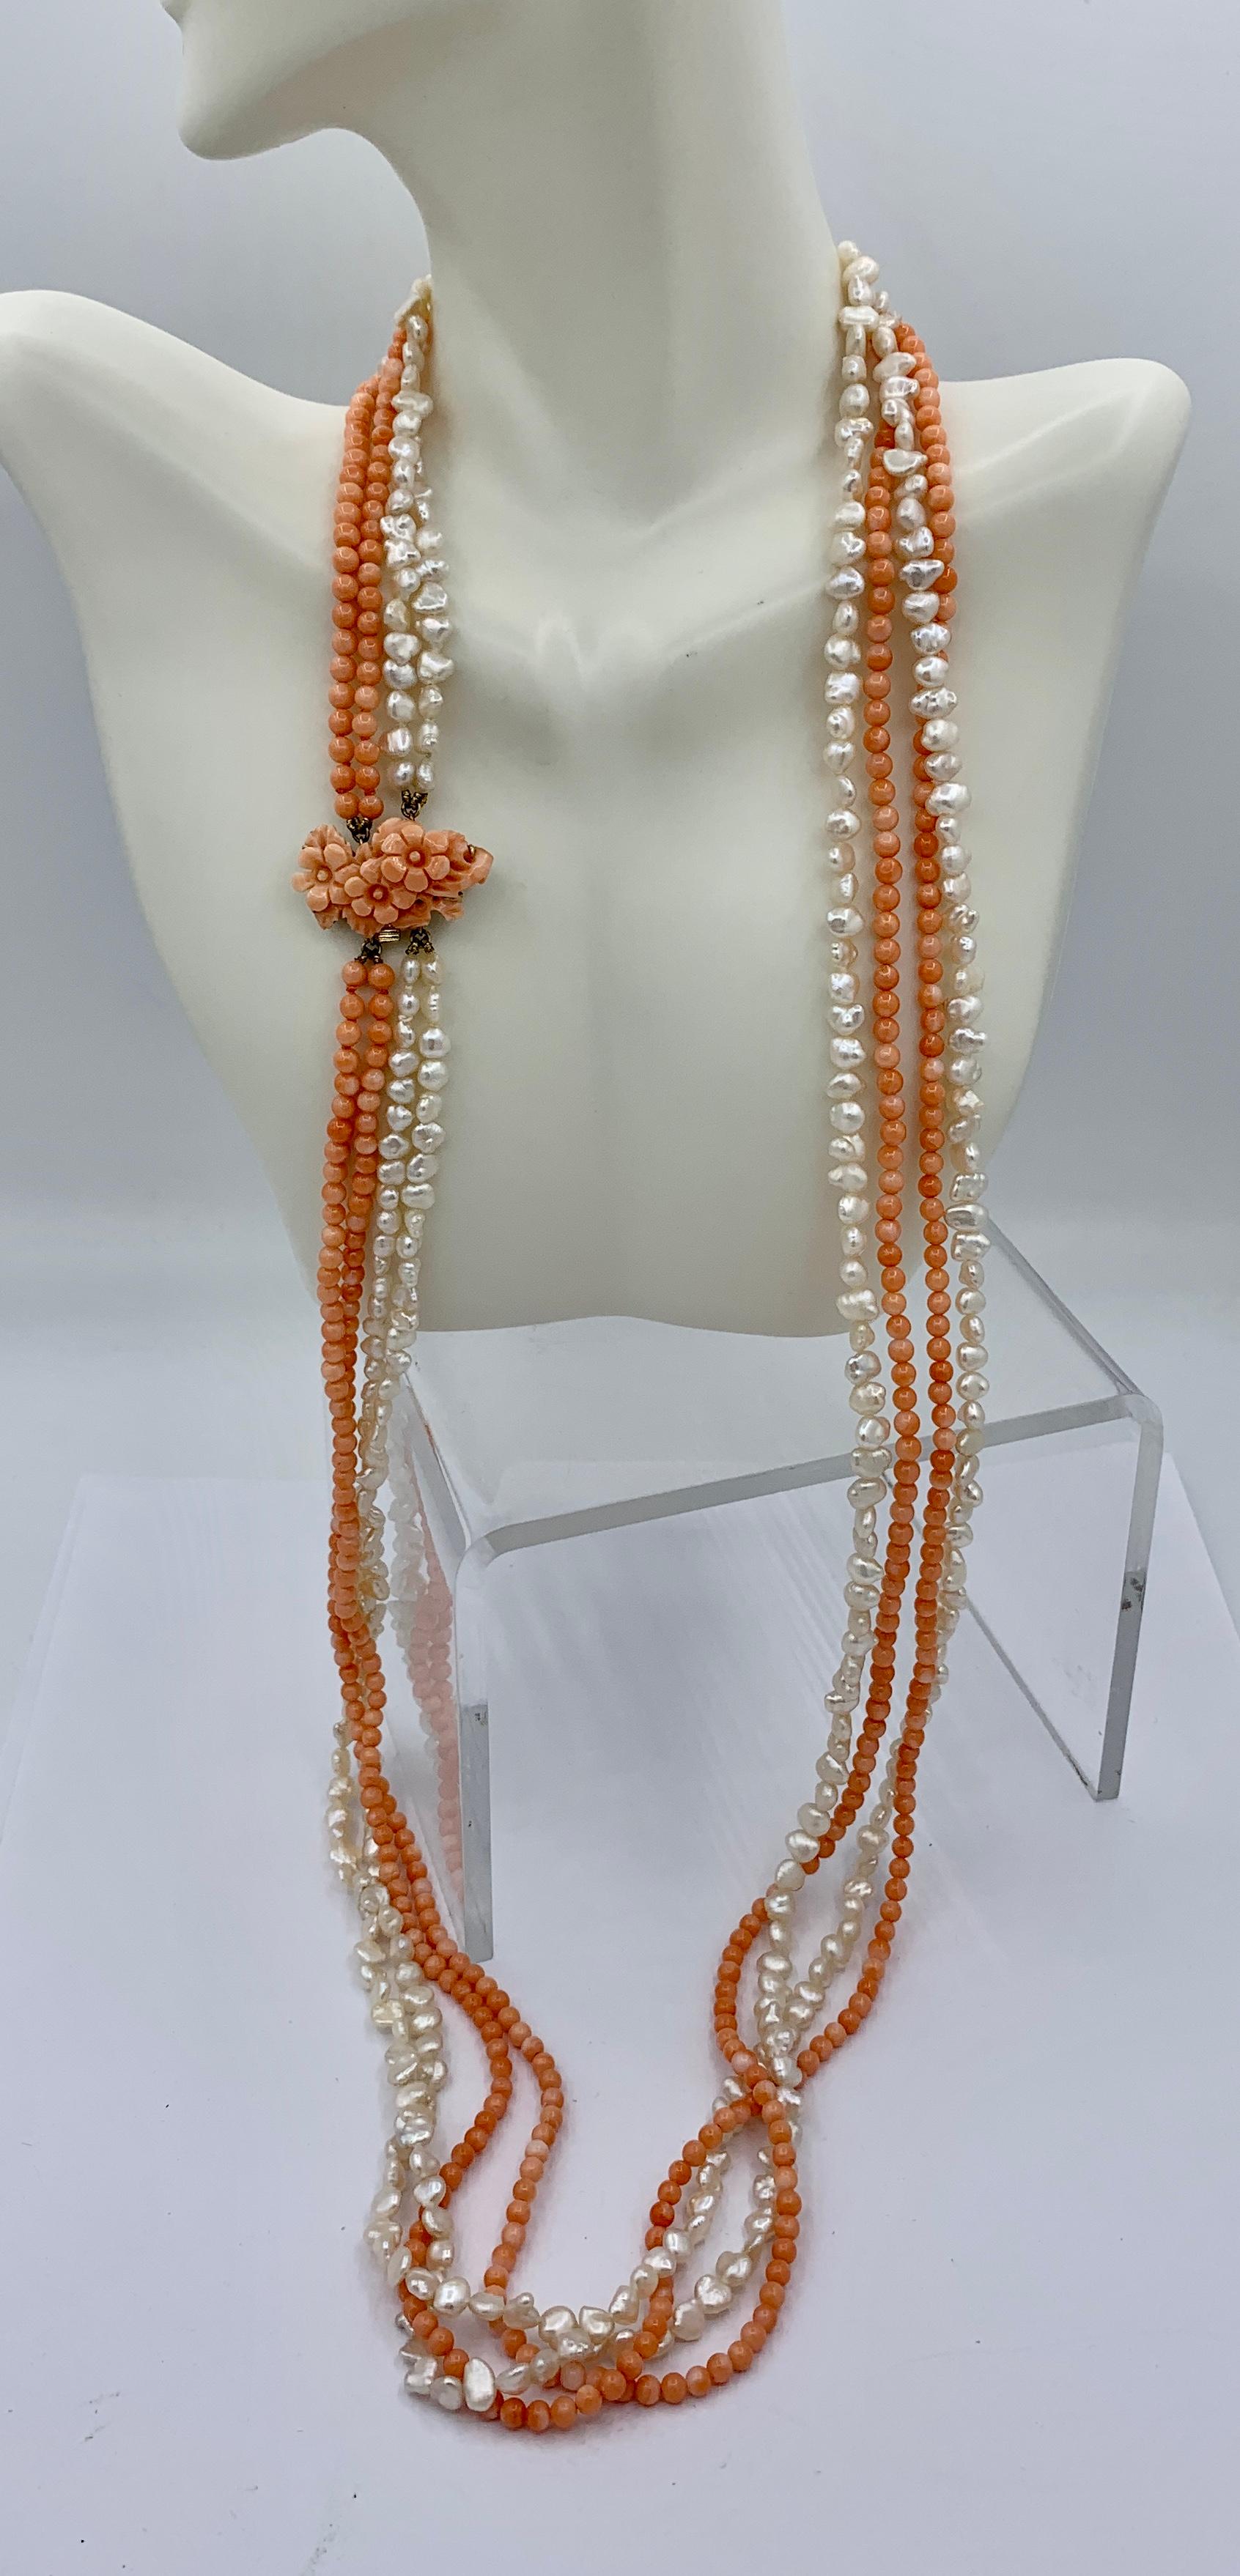 This is a stunning antique salmon colored Coral and Pearl four strand torsade necklace with a beautiful hand carved Coral clasp with a design of a flower, branch and leaves.  The coral clasp is 14 Karat Yellow Gold.   The clasp is a beautiful